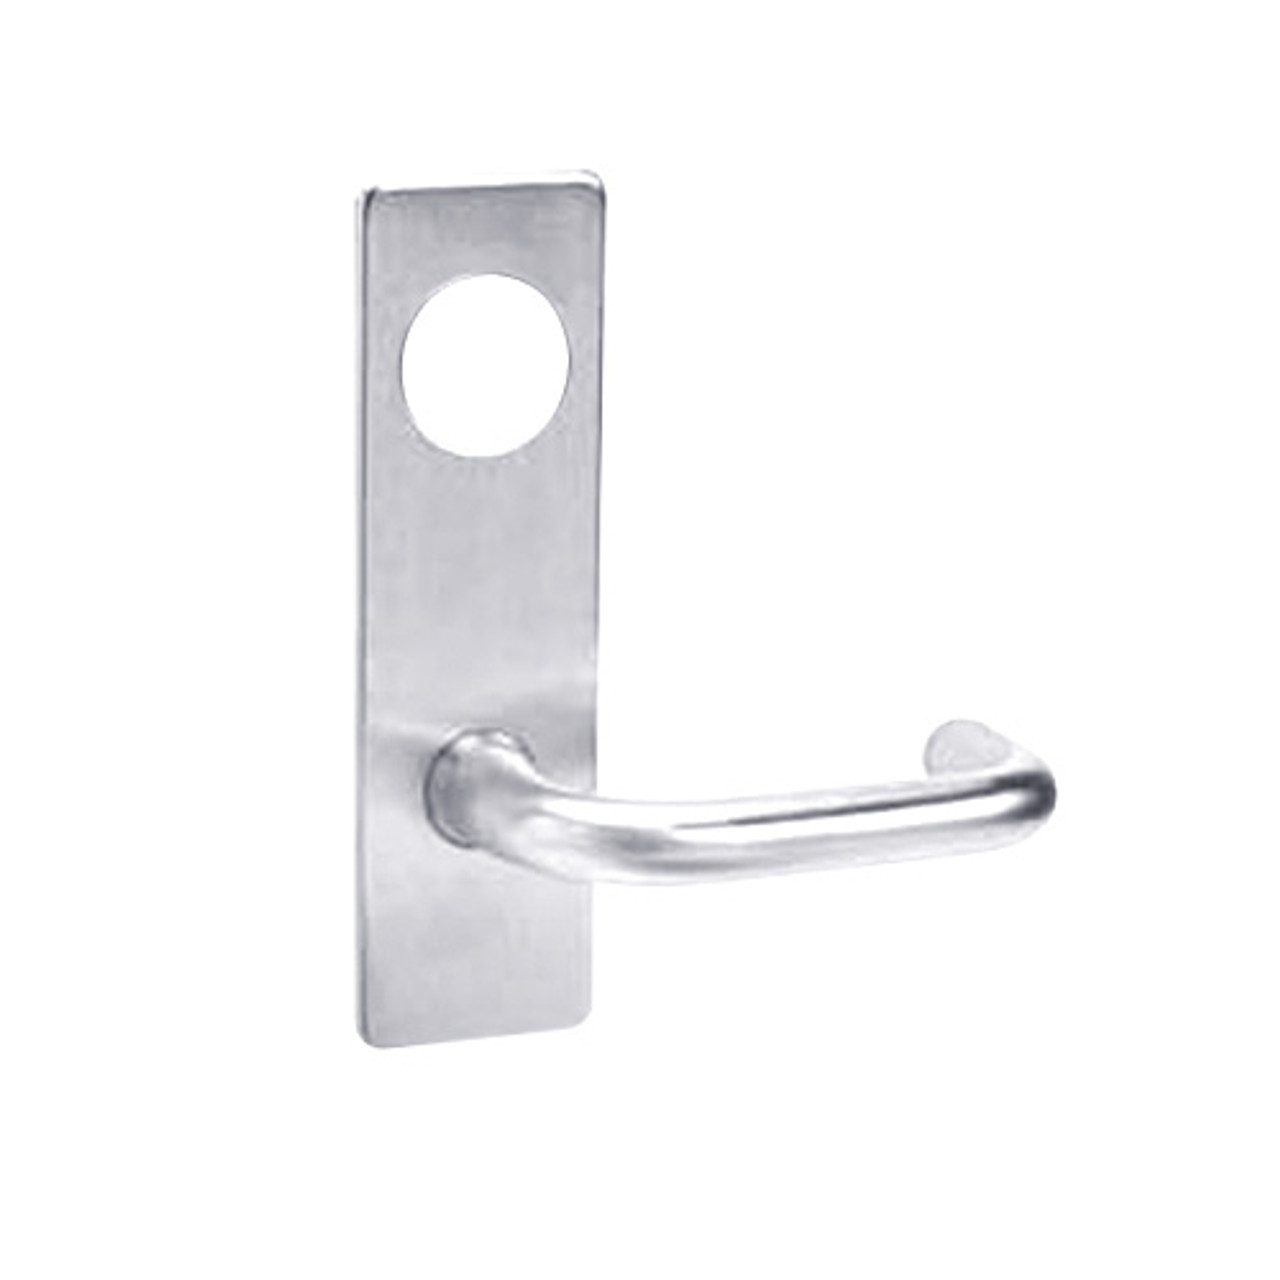 ML2059-LSM-625-LC Corbin Russwin ML2000 Series Mortise Security Storeroom Locksets with Lustra Lever in Bright Chrome